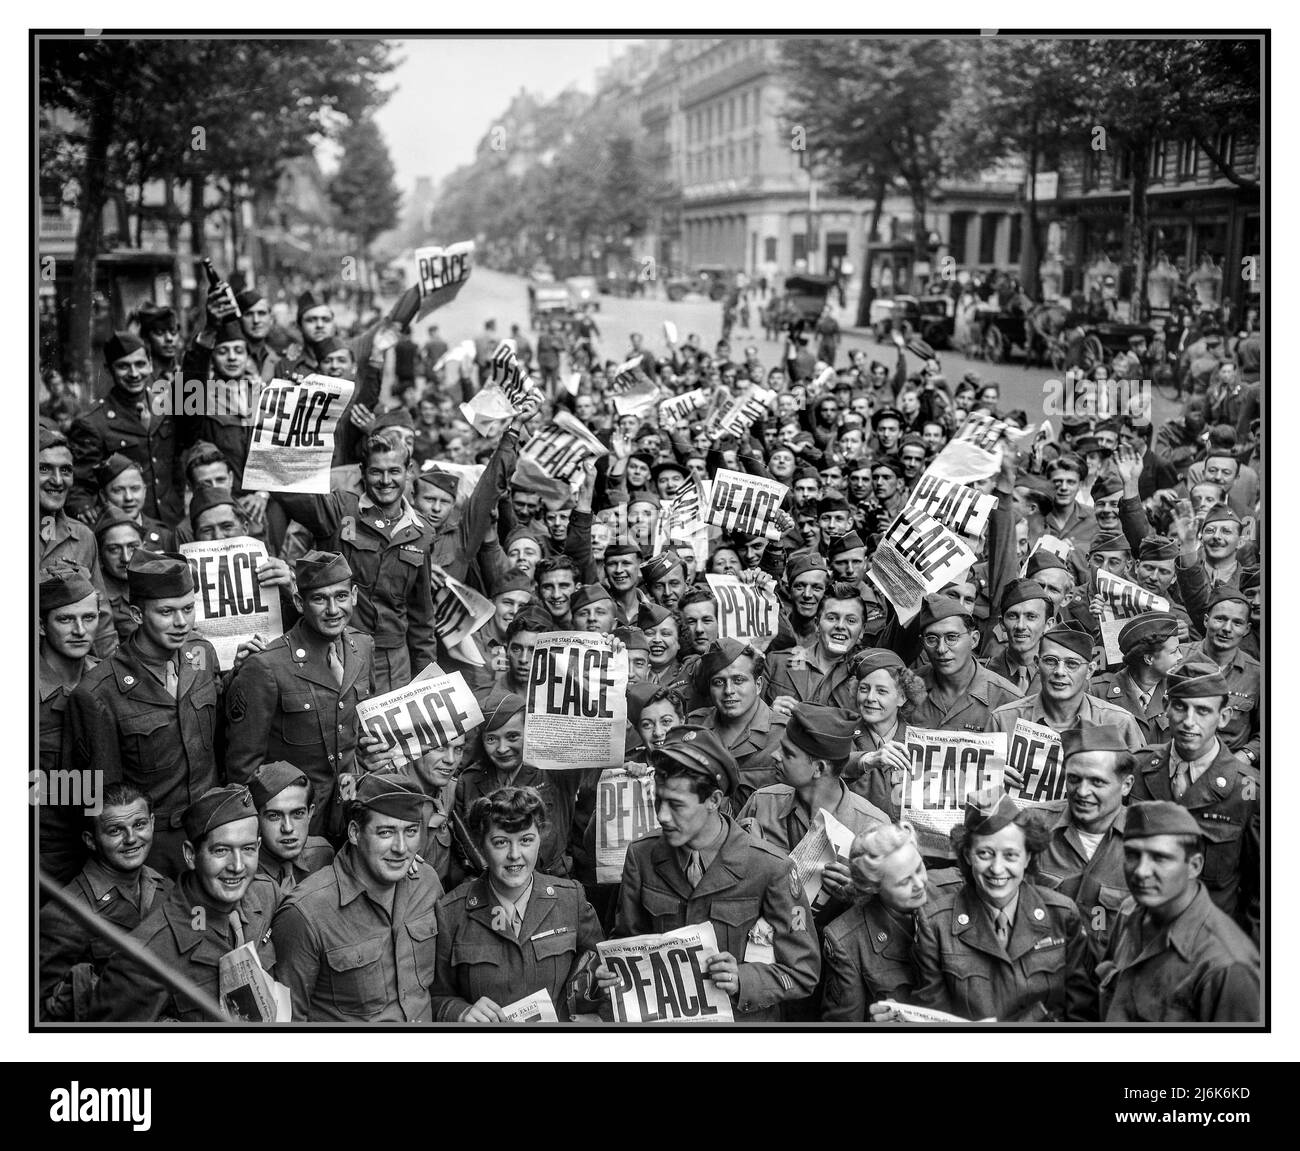 VJ DAY PARIS 1945 American servicemen and women gather in front of 'Rainbow Corner' Red Cross club in Paris to celebrate the unconditional surrender of the Japanese.'  PEACE headline on the US military newspaper 'Stars and Stripes' being held by ecstatic USA military personnel Date 15 August 1945 WW2 World War II Second World War Stock Photo